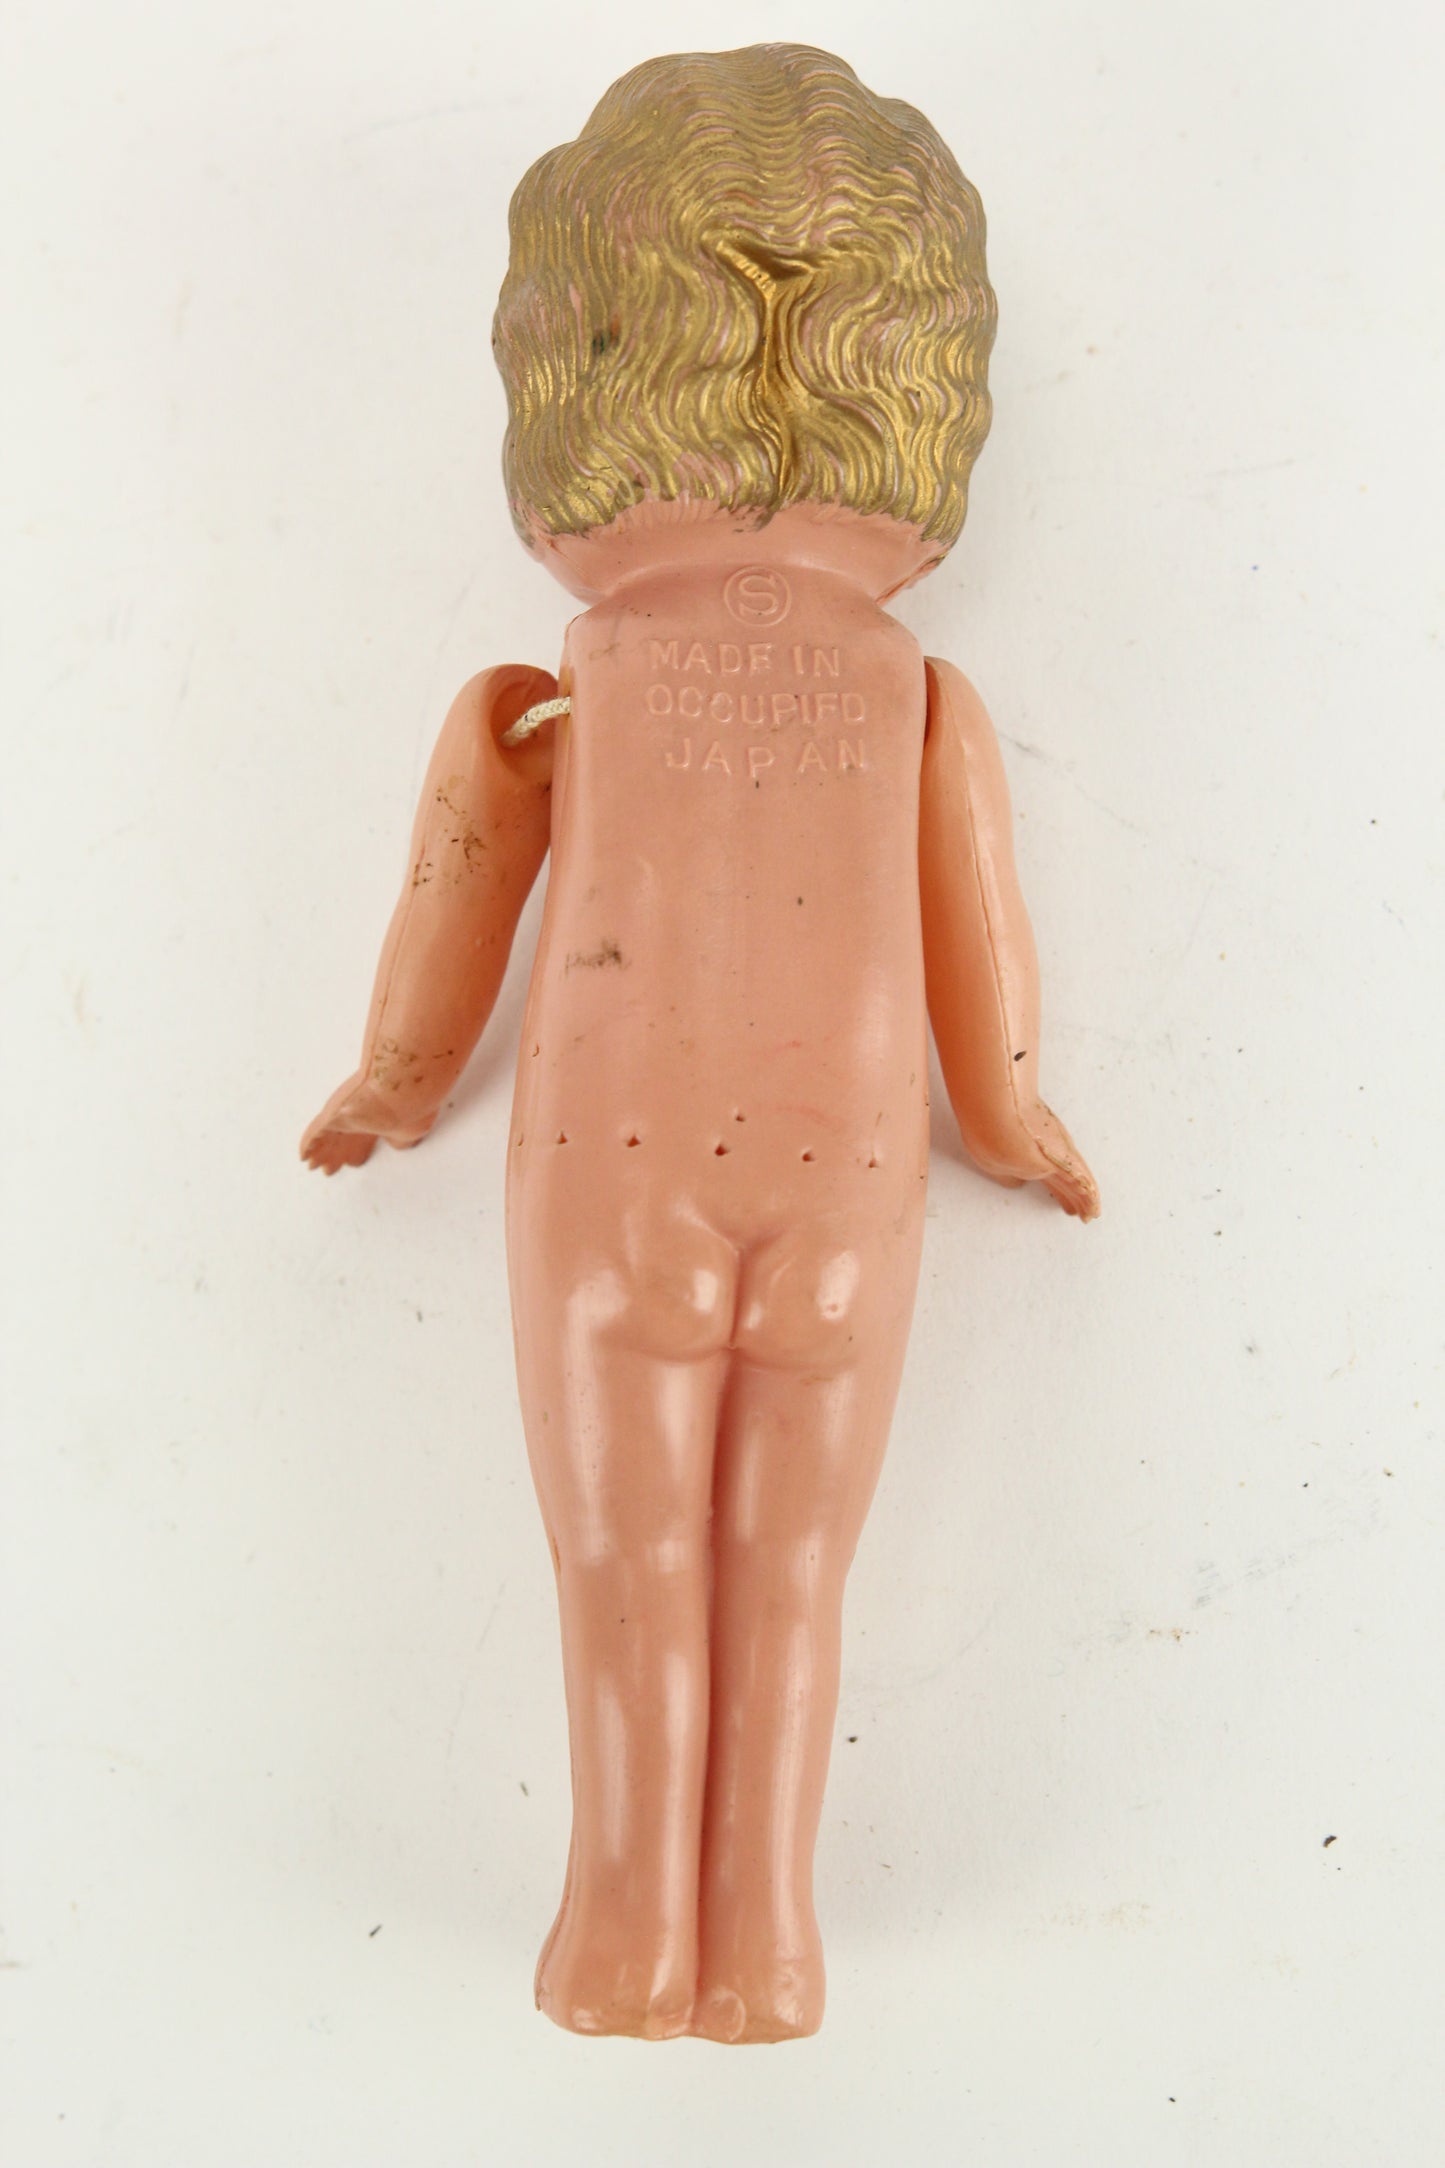 Handpainted Celluloid Flapper Kewpie Doll Made in Occupied Japan, 7"